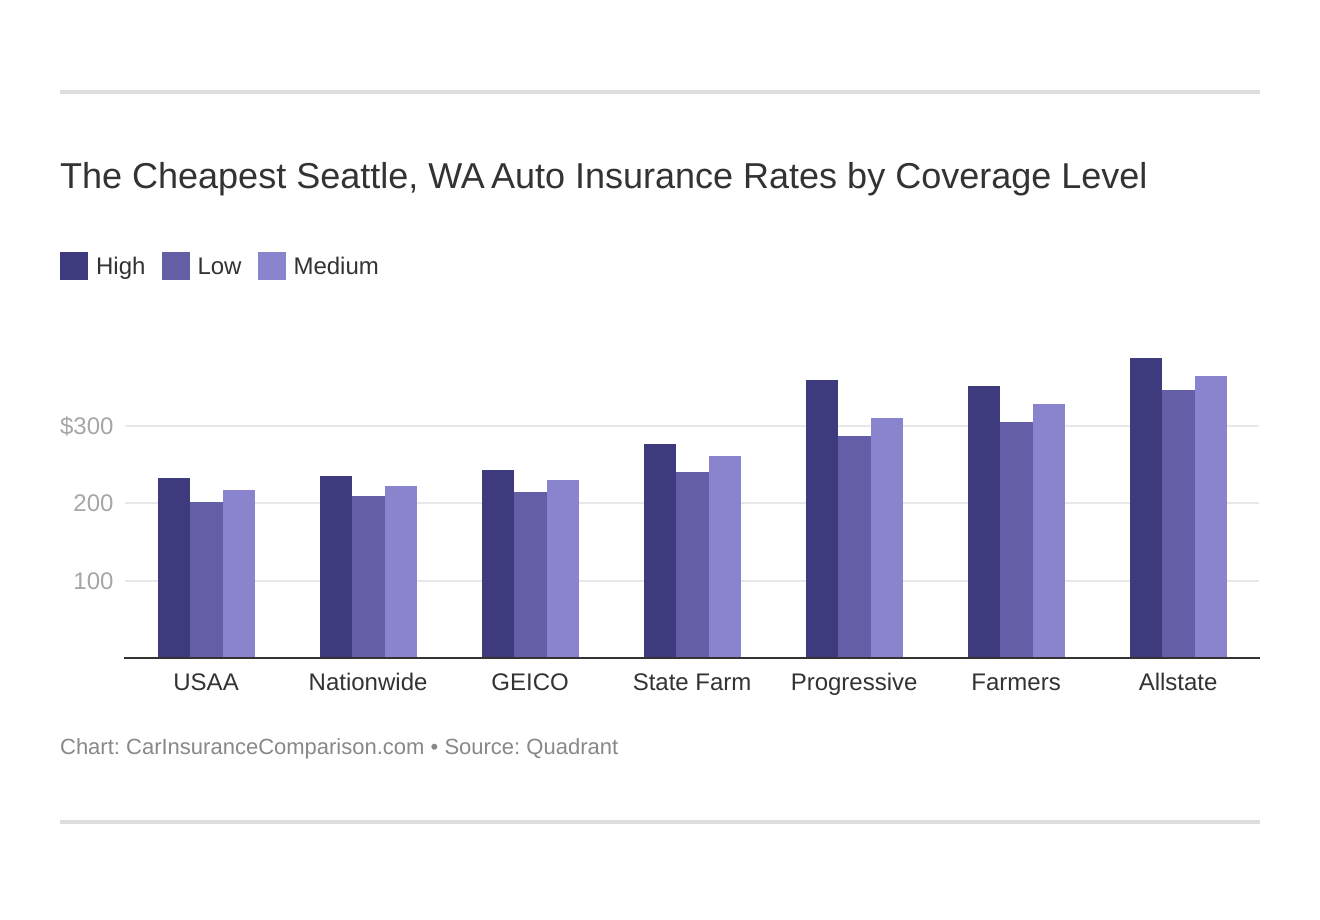 The Cheapest Seattle, WA Auto Insurance Rates by Coverage Level